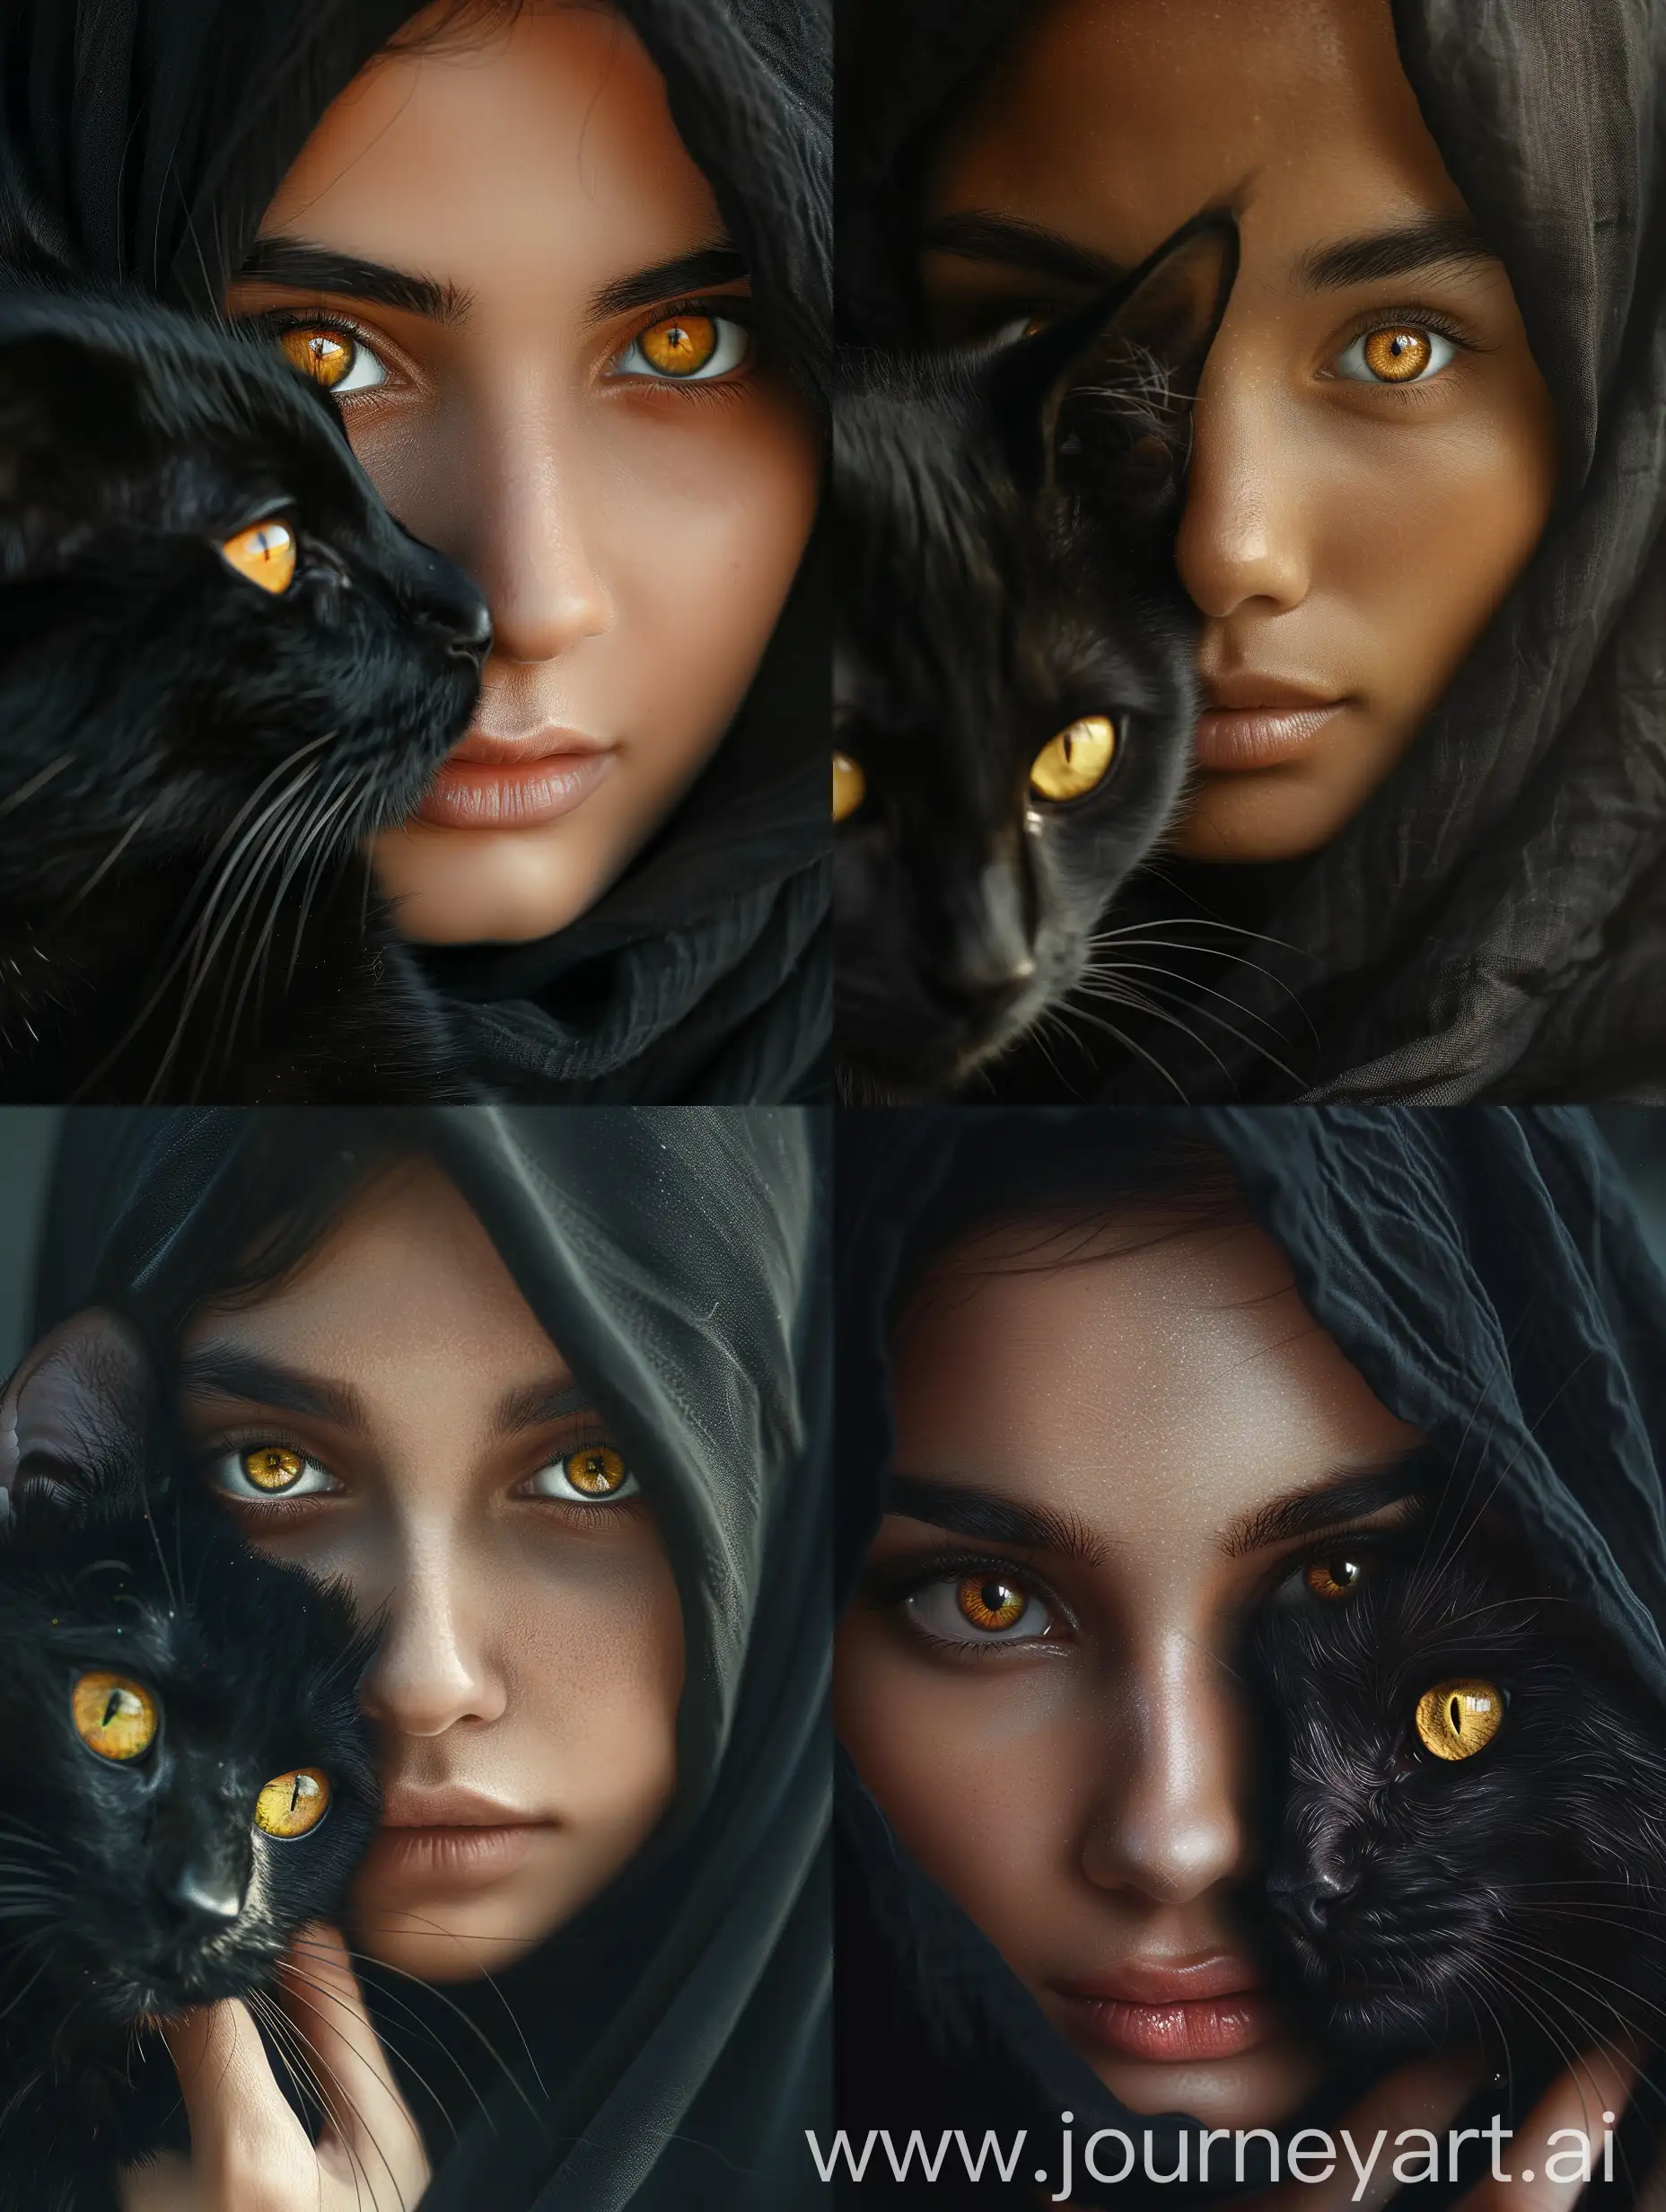 Intimate-Portrait-of-a-Young-Woman-in-Hijab-Holding-a-Striking-Black-Cat